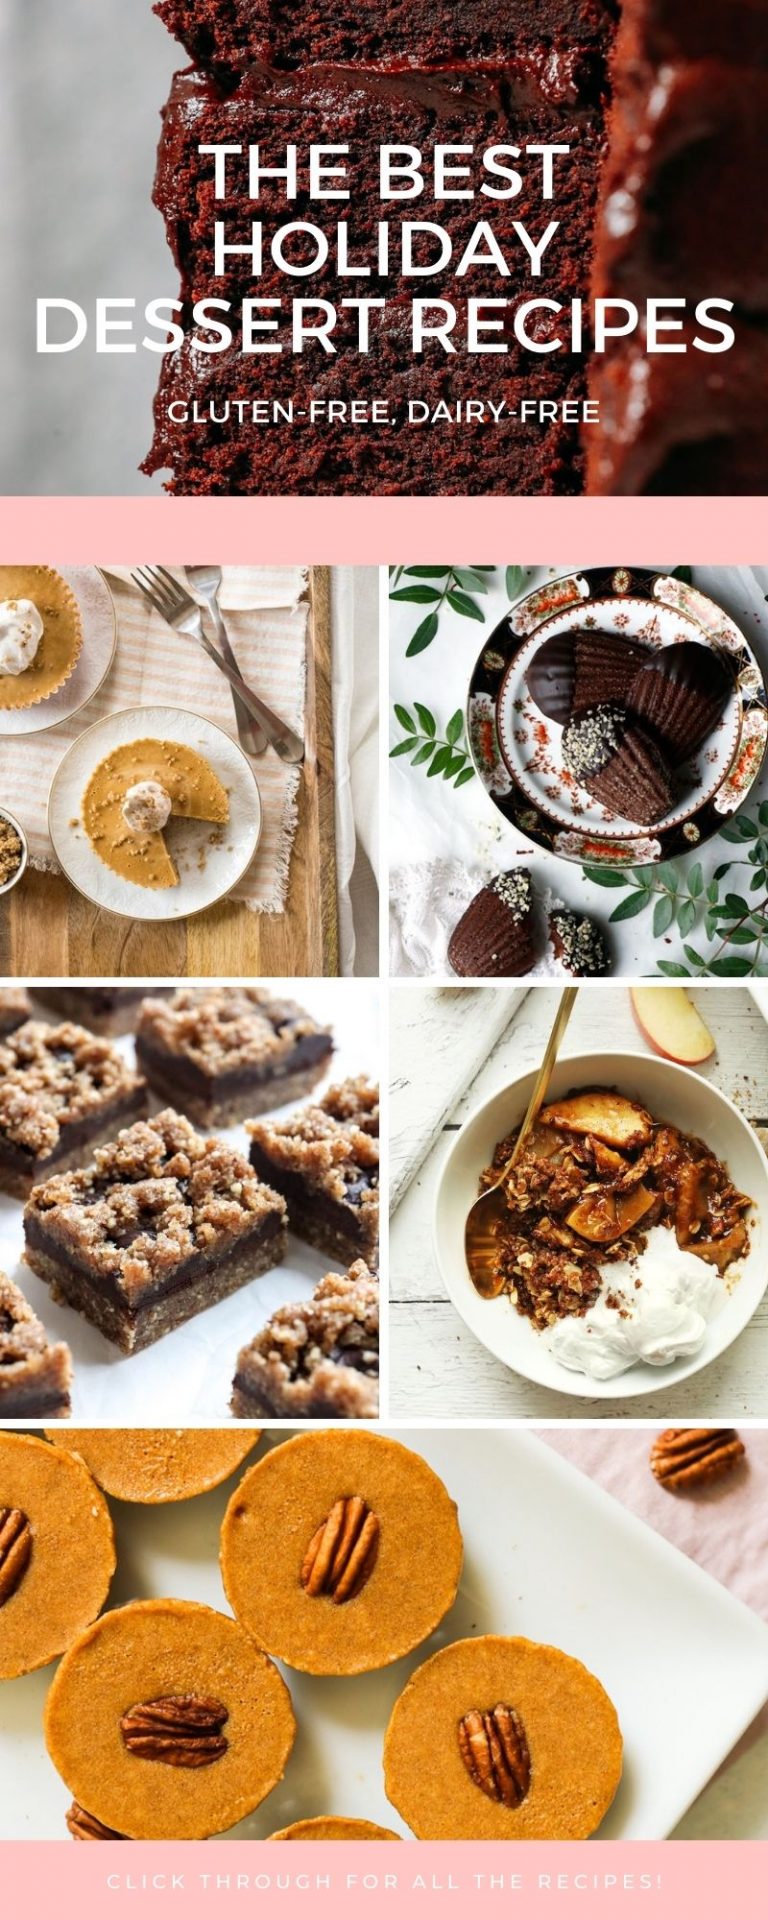 allergy-friendly-holiday-desserts-thanksgiving-delicious-christmas-gluten-free-dairy-free